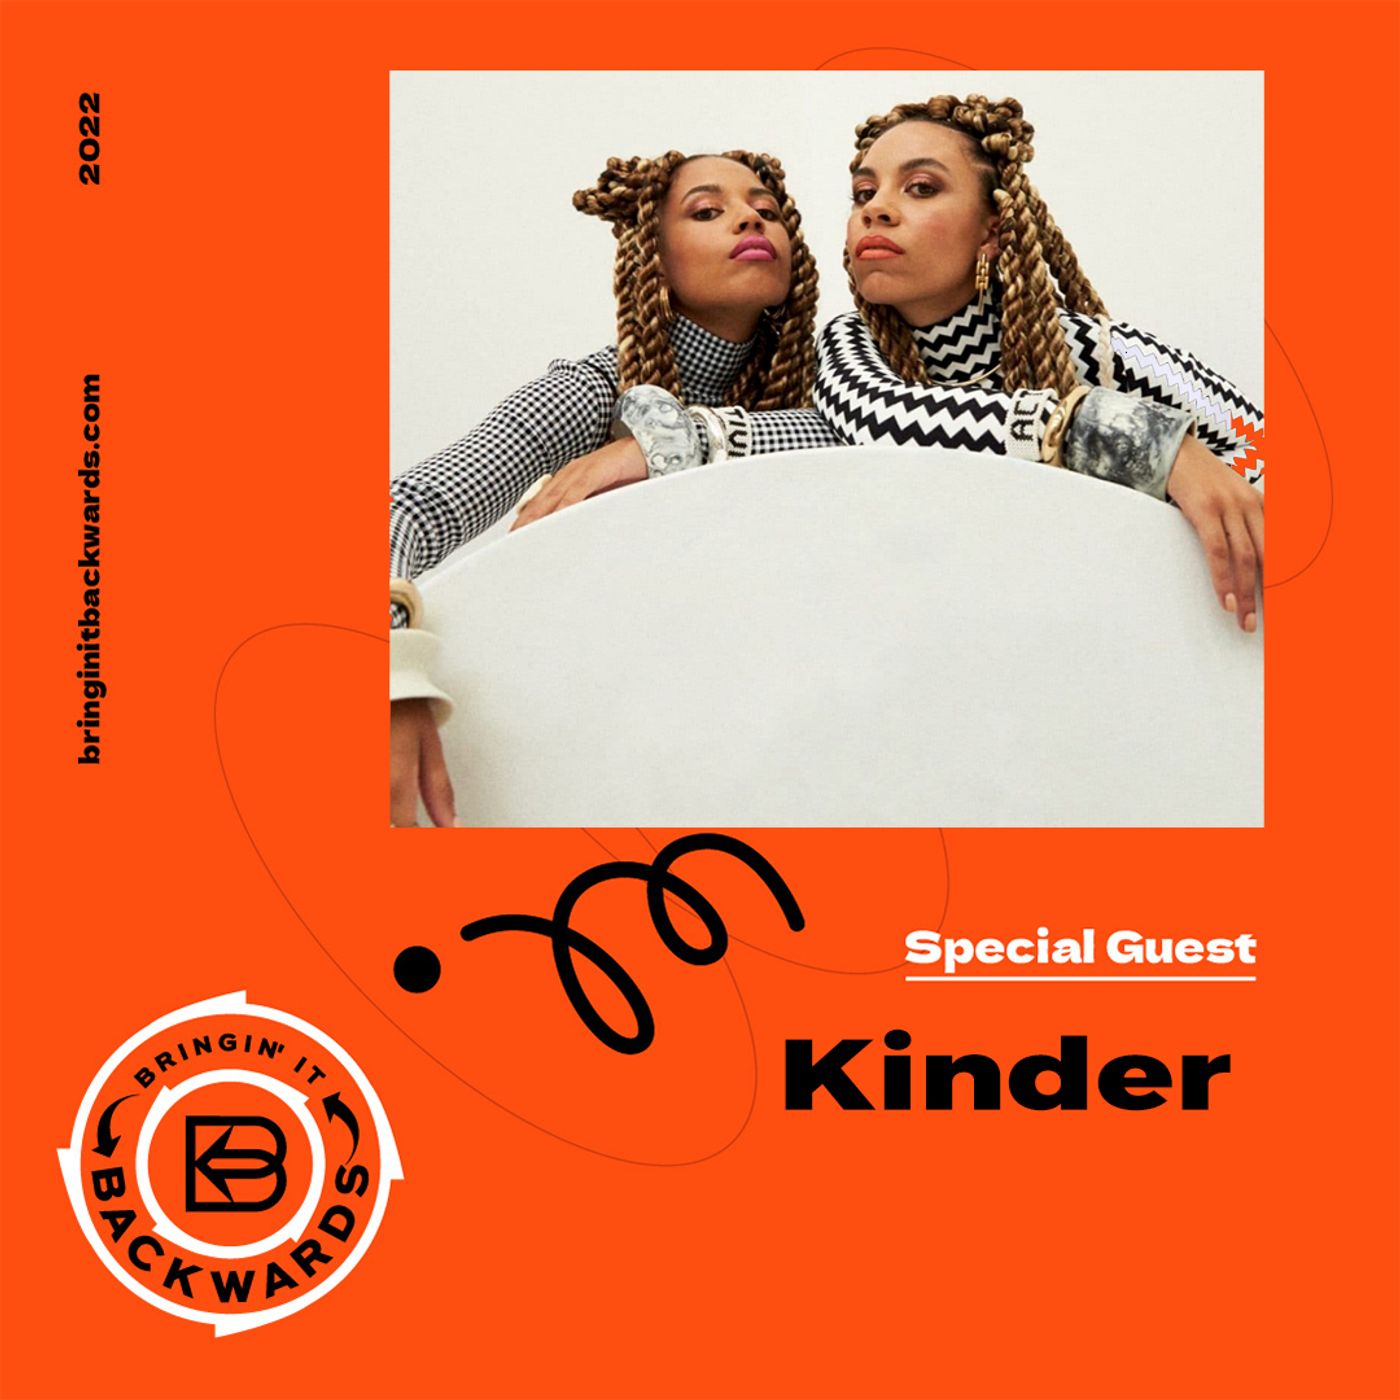 Interview with Kinder Image